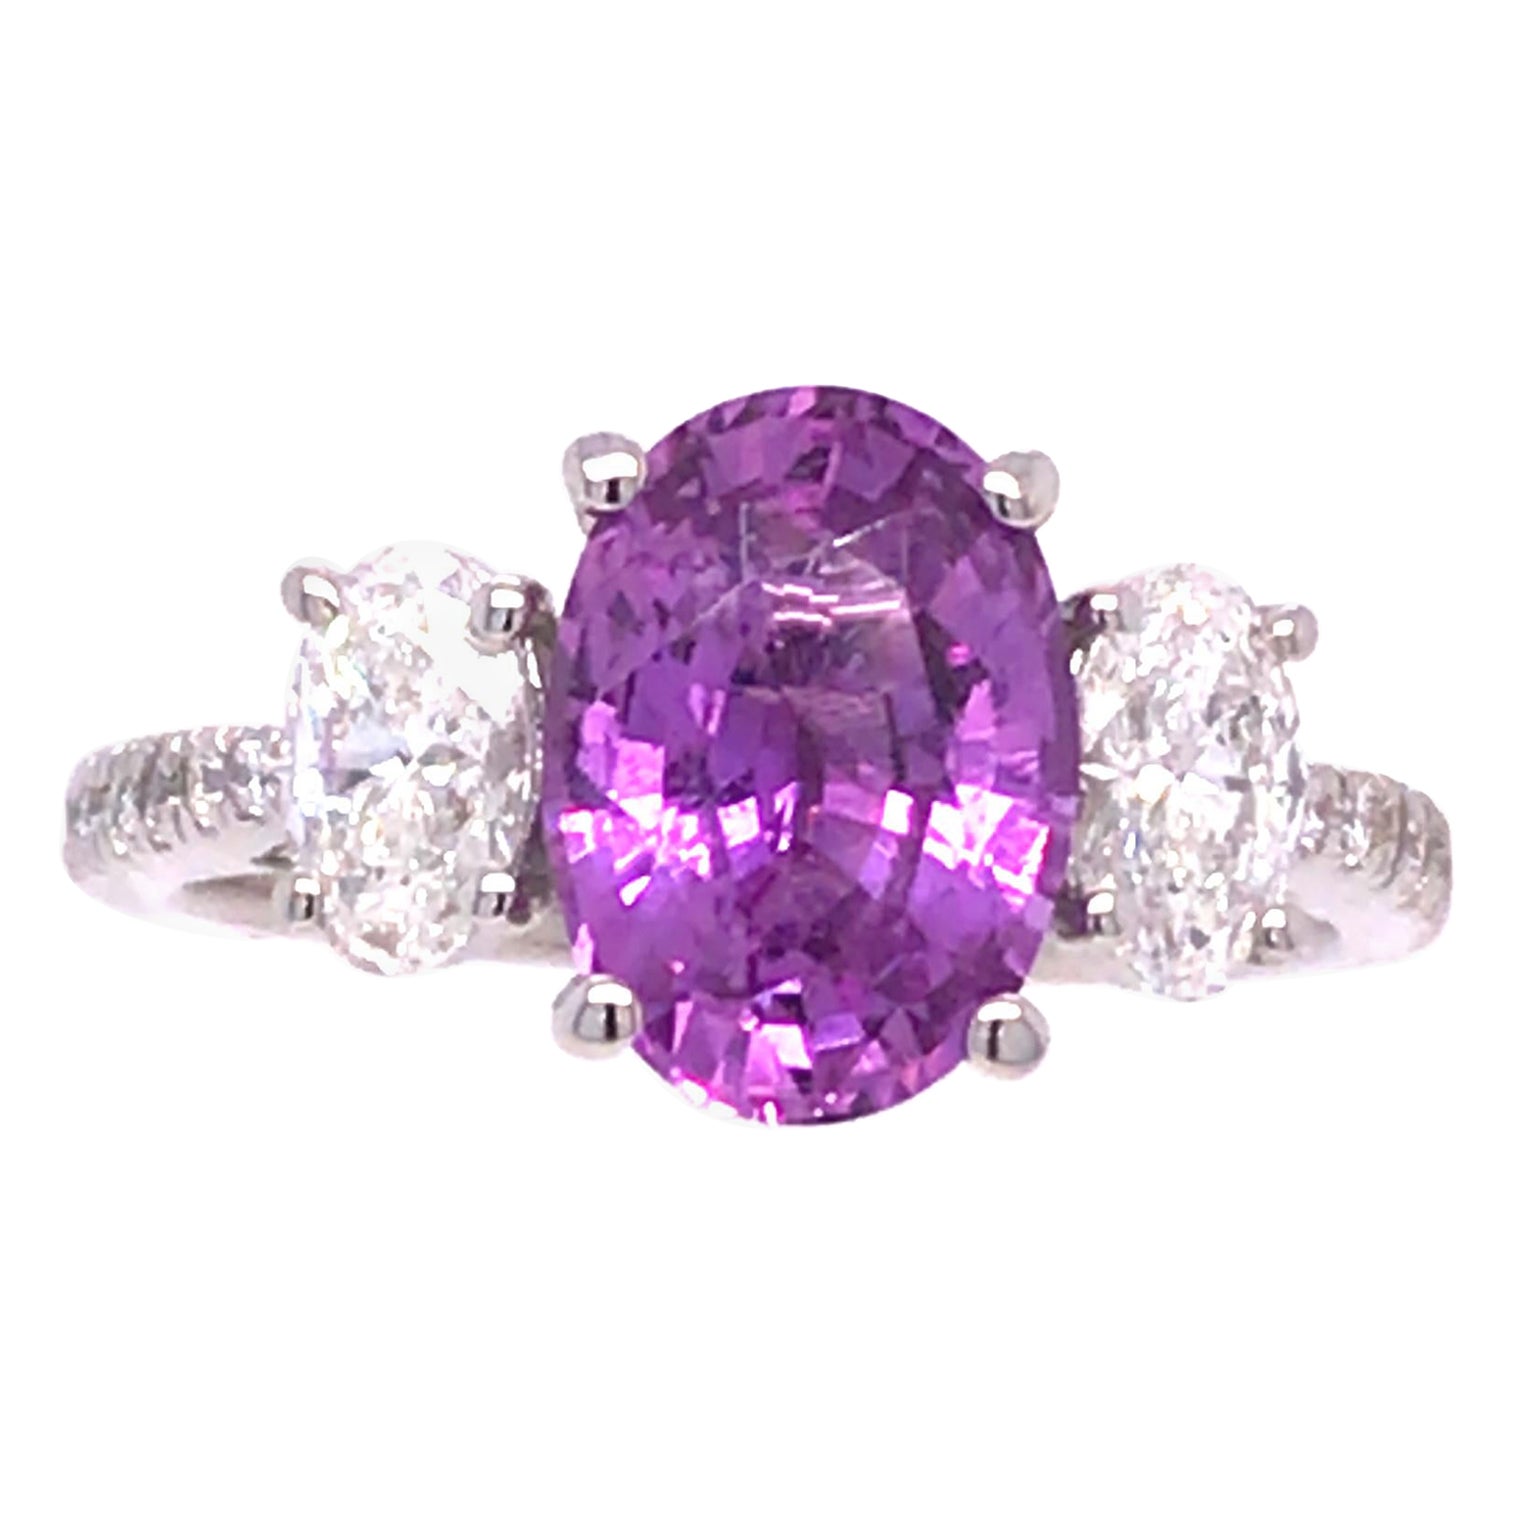 2.53 Carat Oval Cut Pink Rose Sapphire and Diamond Ring in 18k White Gold